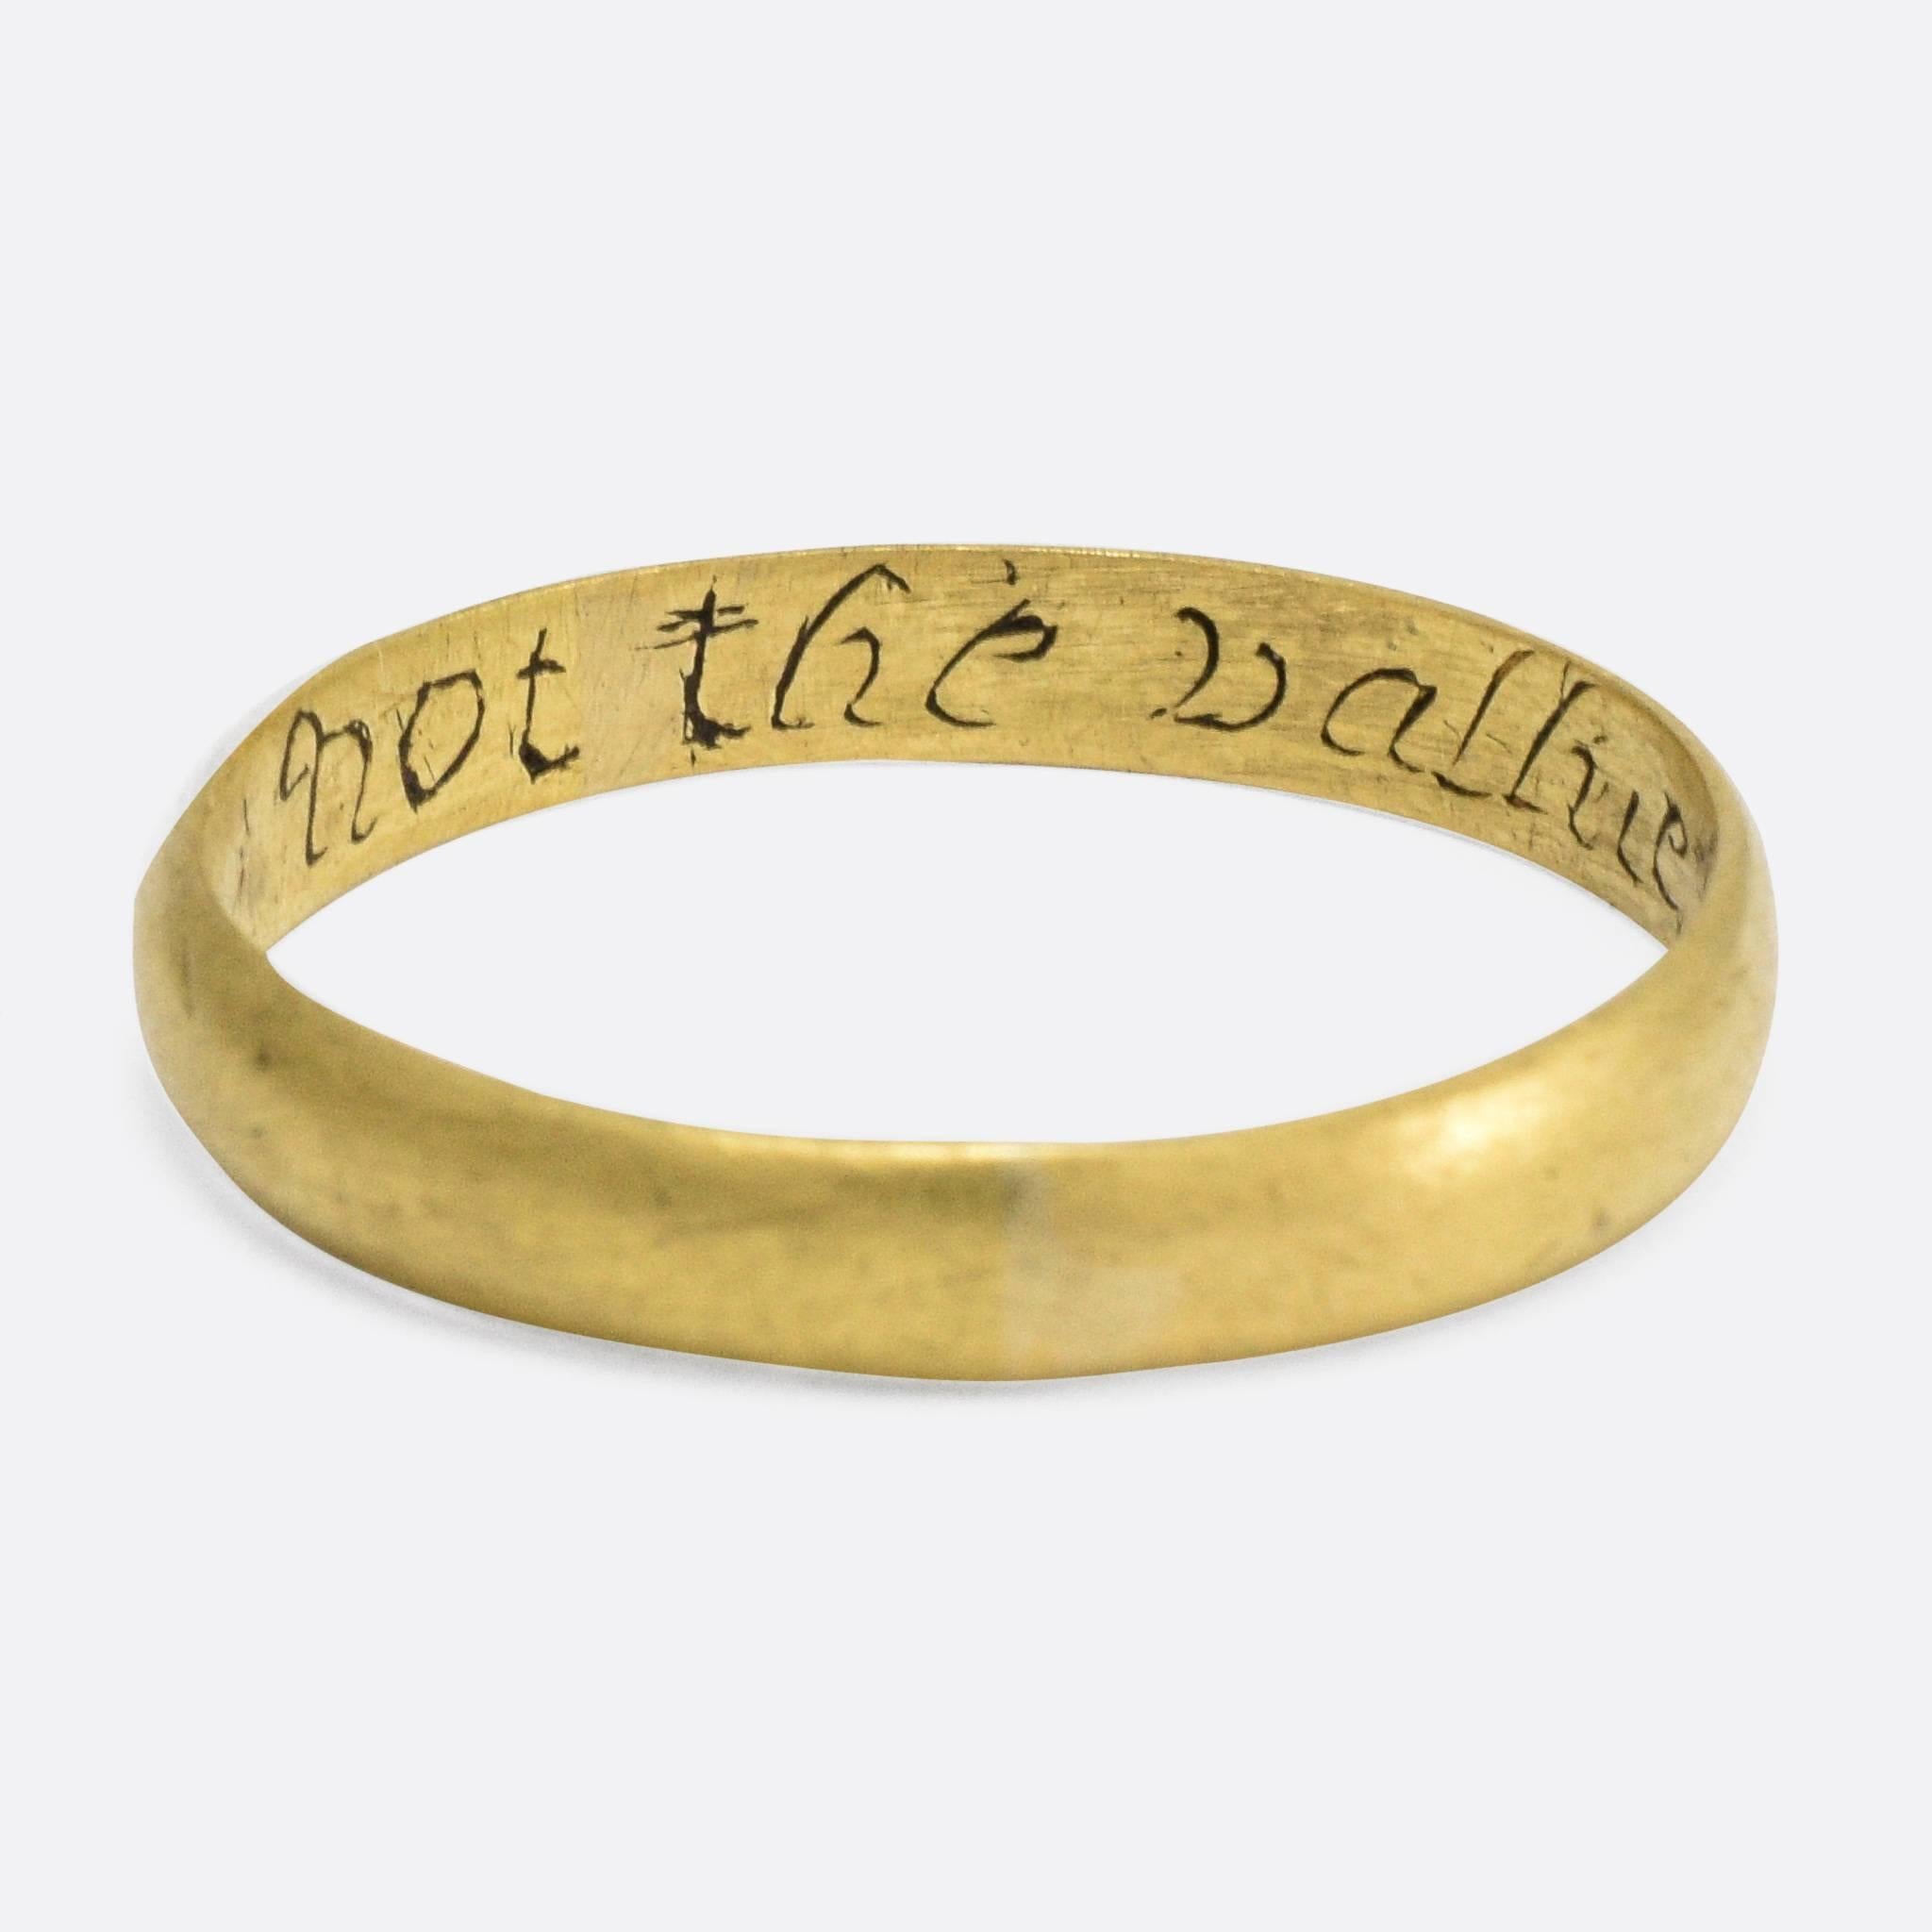 Poesy (posey) Rings were popular during the 15th through the 17th centuries in both England and France as lovers' gifts. The quotations were often from contemporary courtship stories and usually inscribed on the inner surface of the ring; they were